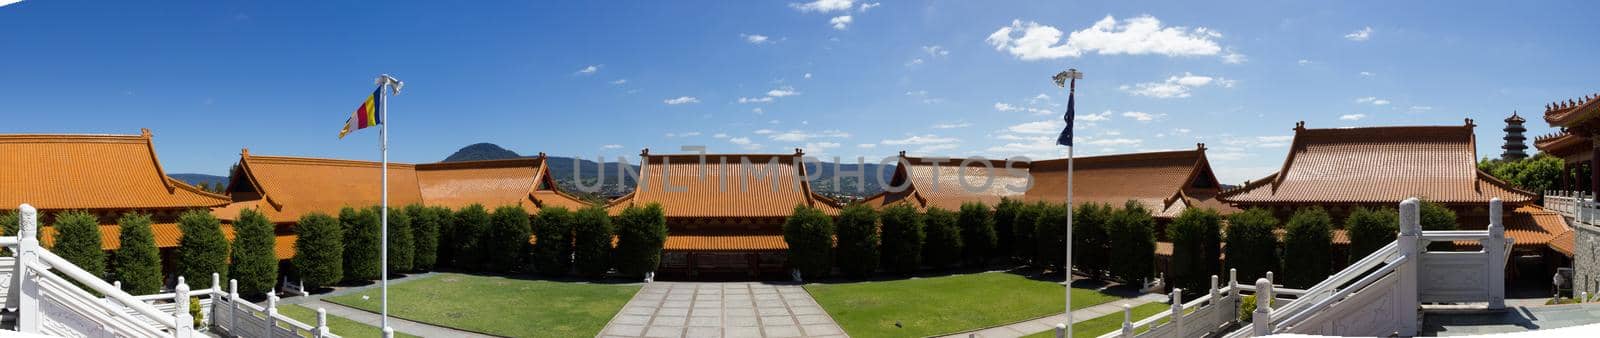 Panorama of Nan Tien Temple Buddha religion in Australia by bettercallcurry